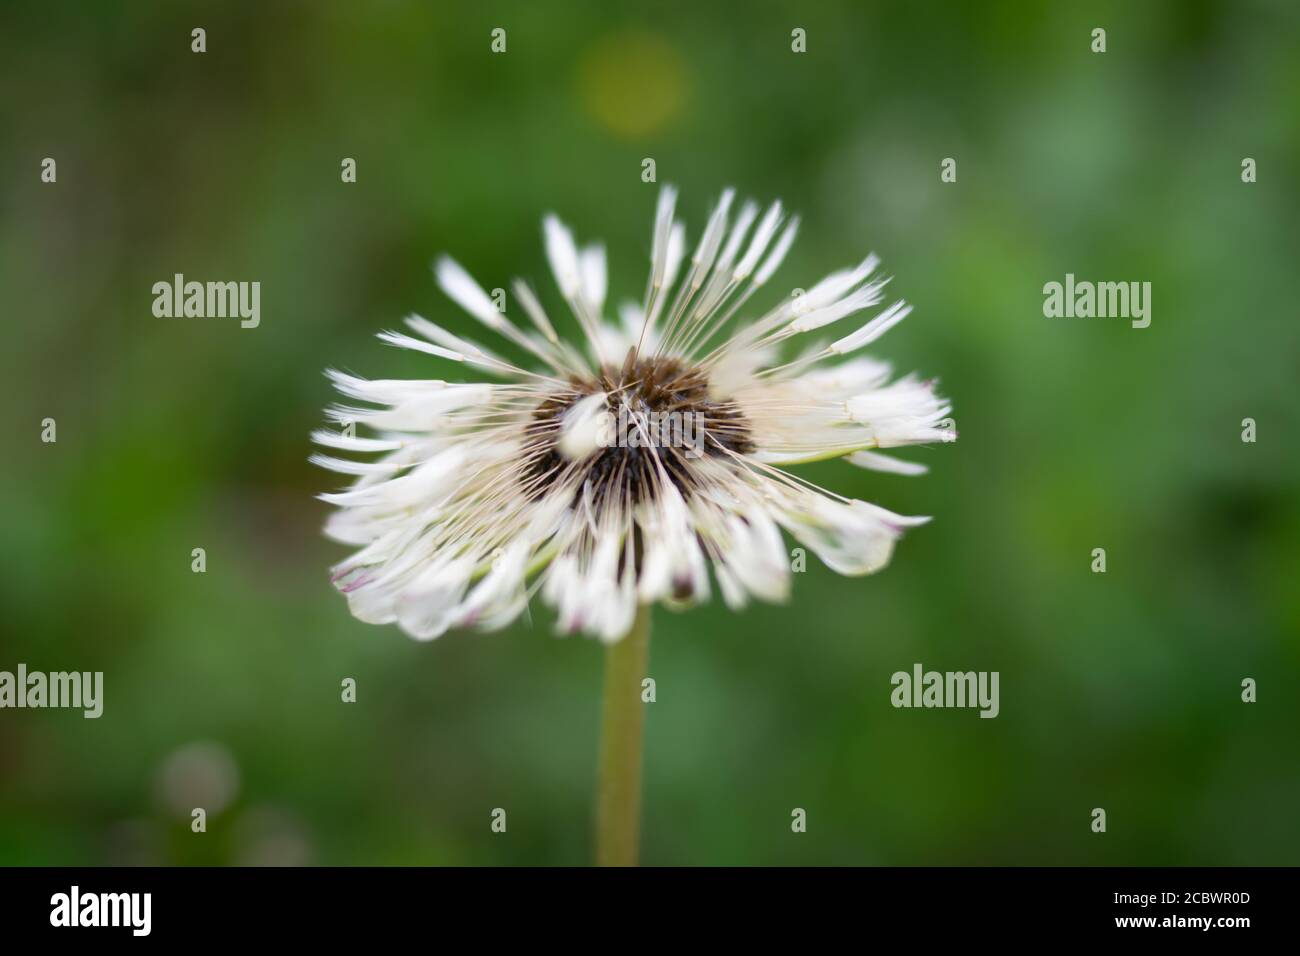 Single stem of the wild officinal plant of the dandelion, with seeds with the typical umbrella shape Stock Photo